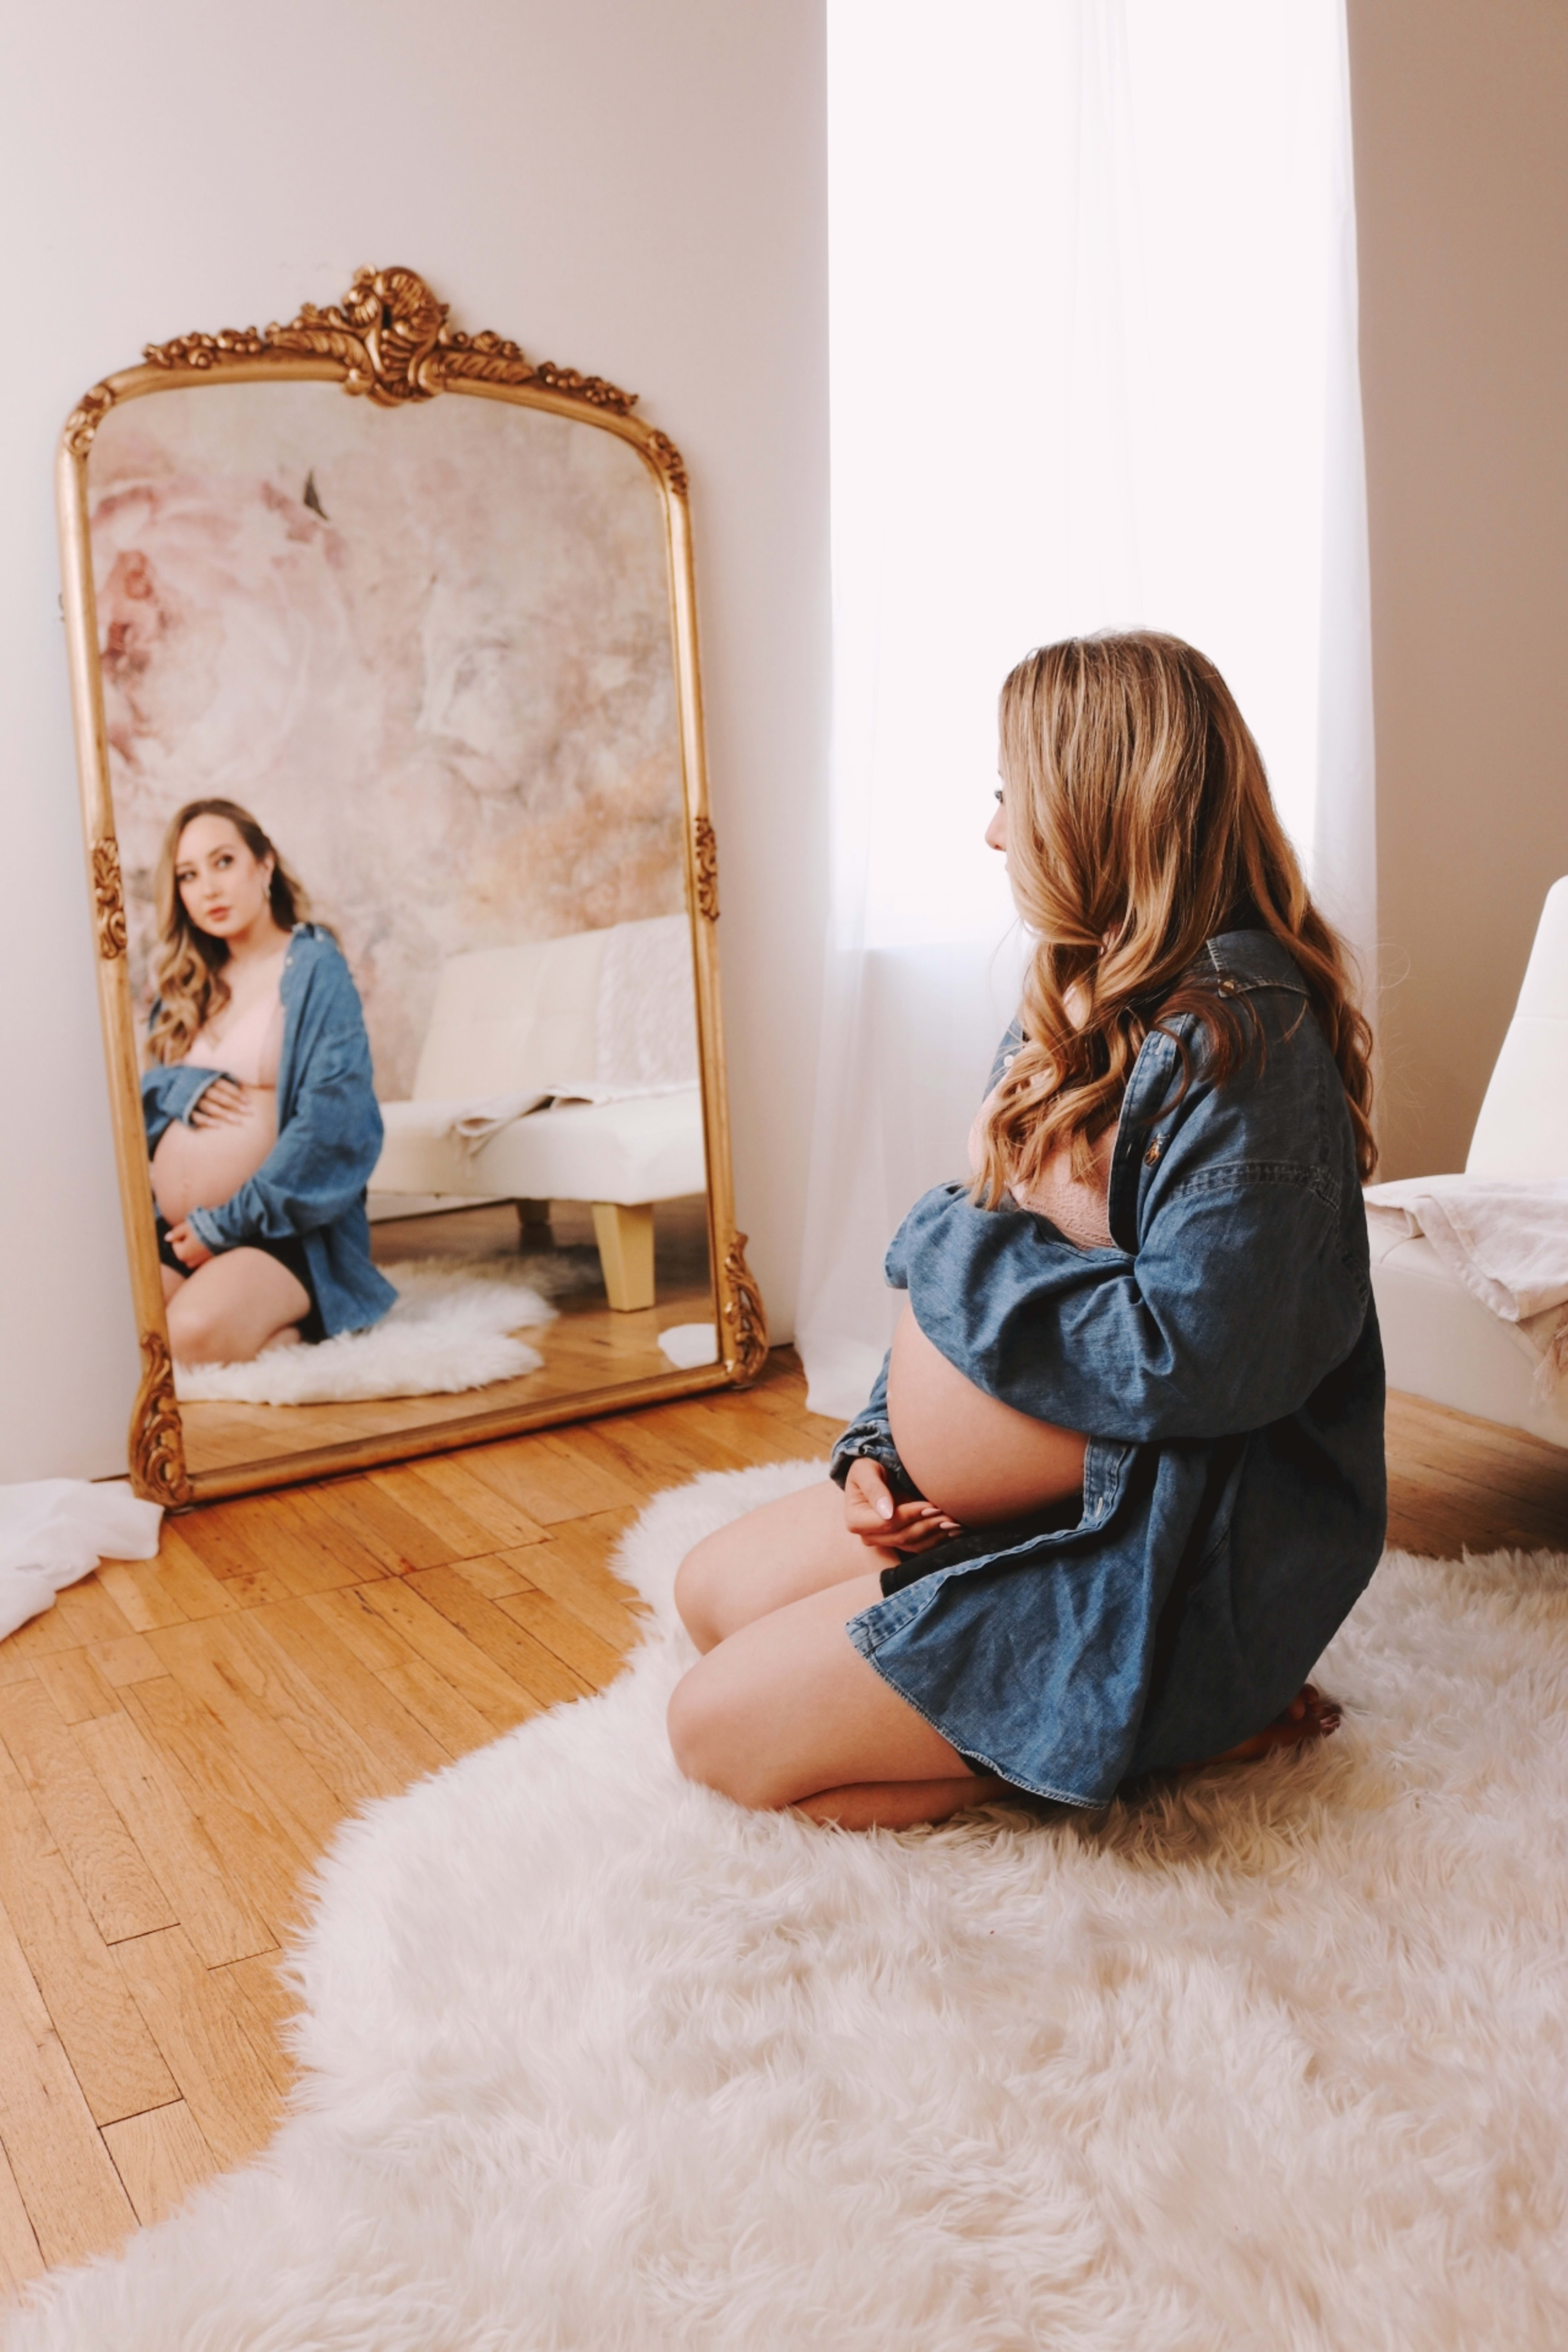 A pregnant woman sitting on white floor for a maternity photo shoot in front of a mirror.